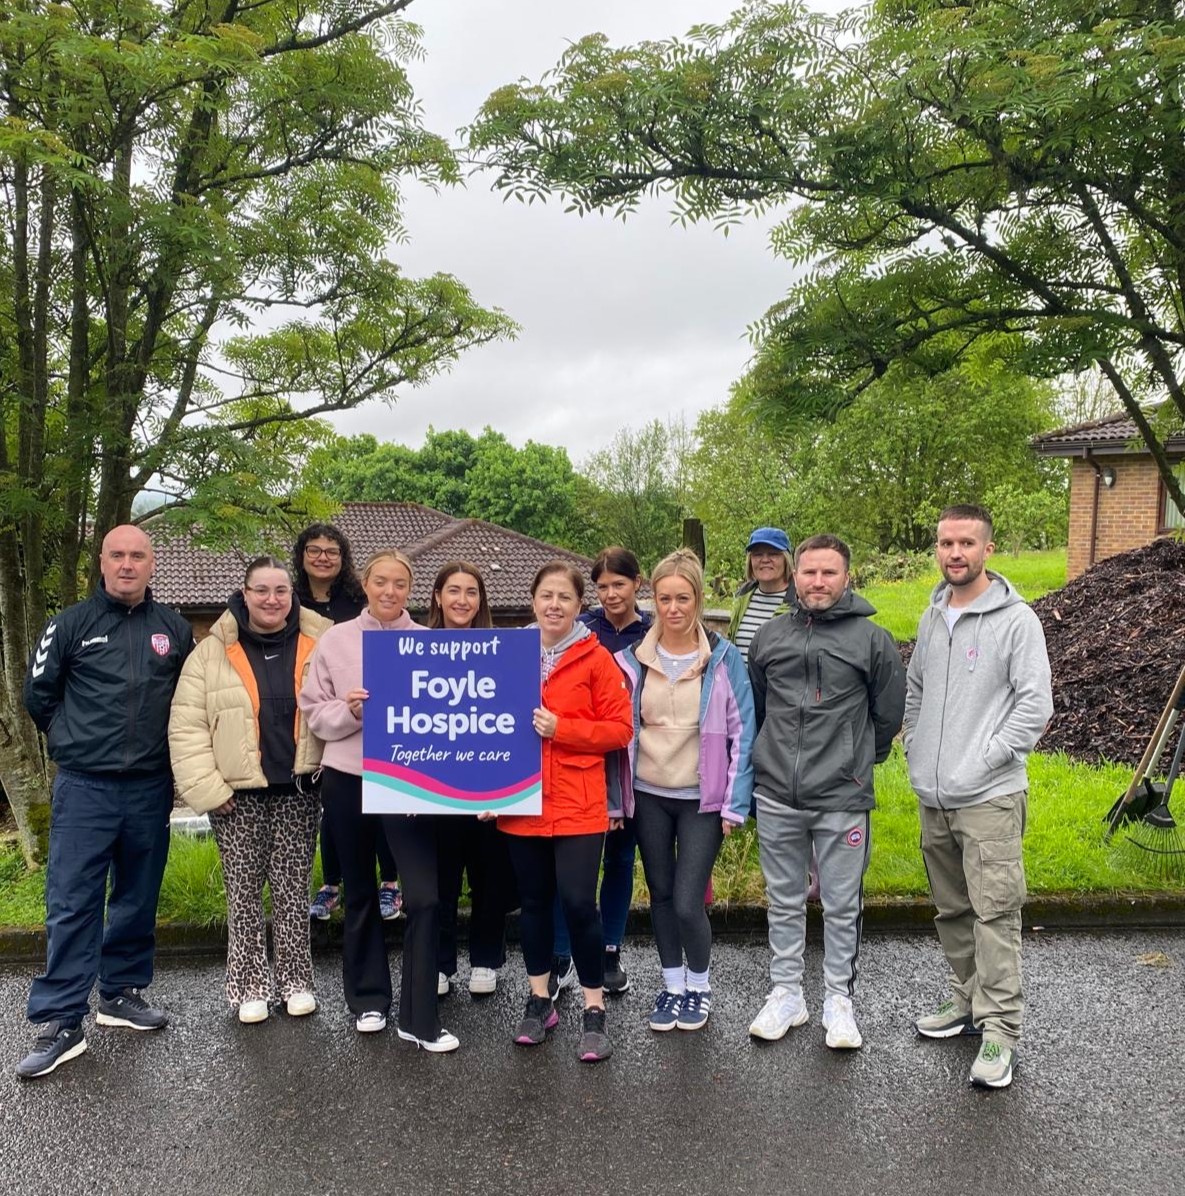 A big thank you to the wonderful volunteers from @AXA who are braving the rain and working hard in our Hospice gardens today! 🏡 If you would like to find out more about corporate volunteering, please visit: foylehospice.com/get-involved/c… #thankyou #AXA #volunteers